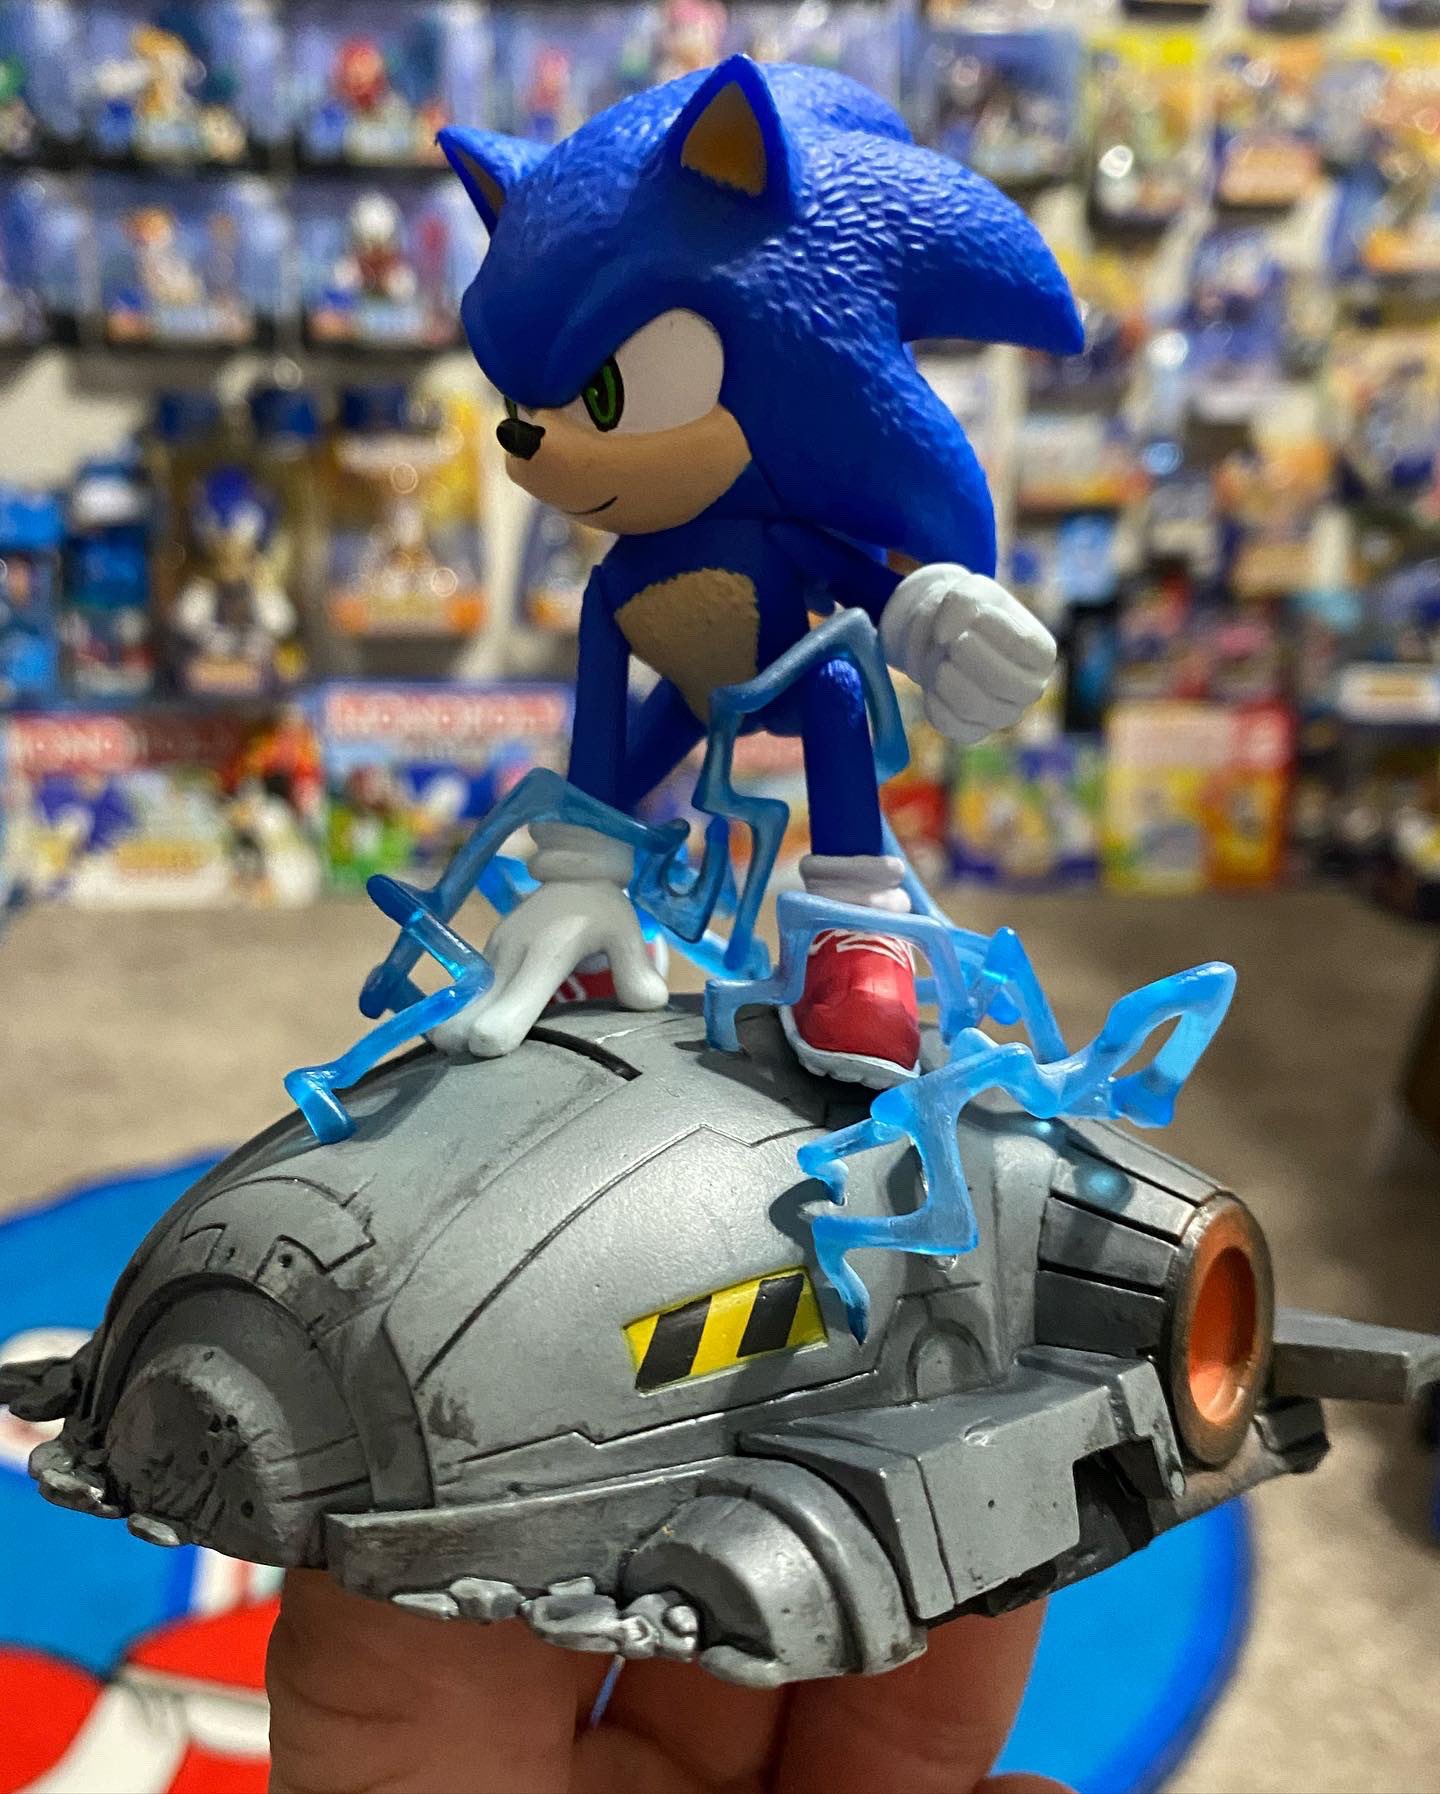 TreasureHuntingSonic on X: Not only does the Sonic movie release today  digitally, but you can now also preorder this Sonic Movie 1/6 scale statue  from your local comic shop! Designed by @JoeAllard